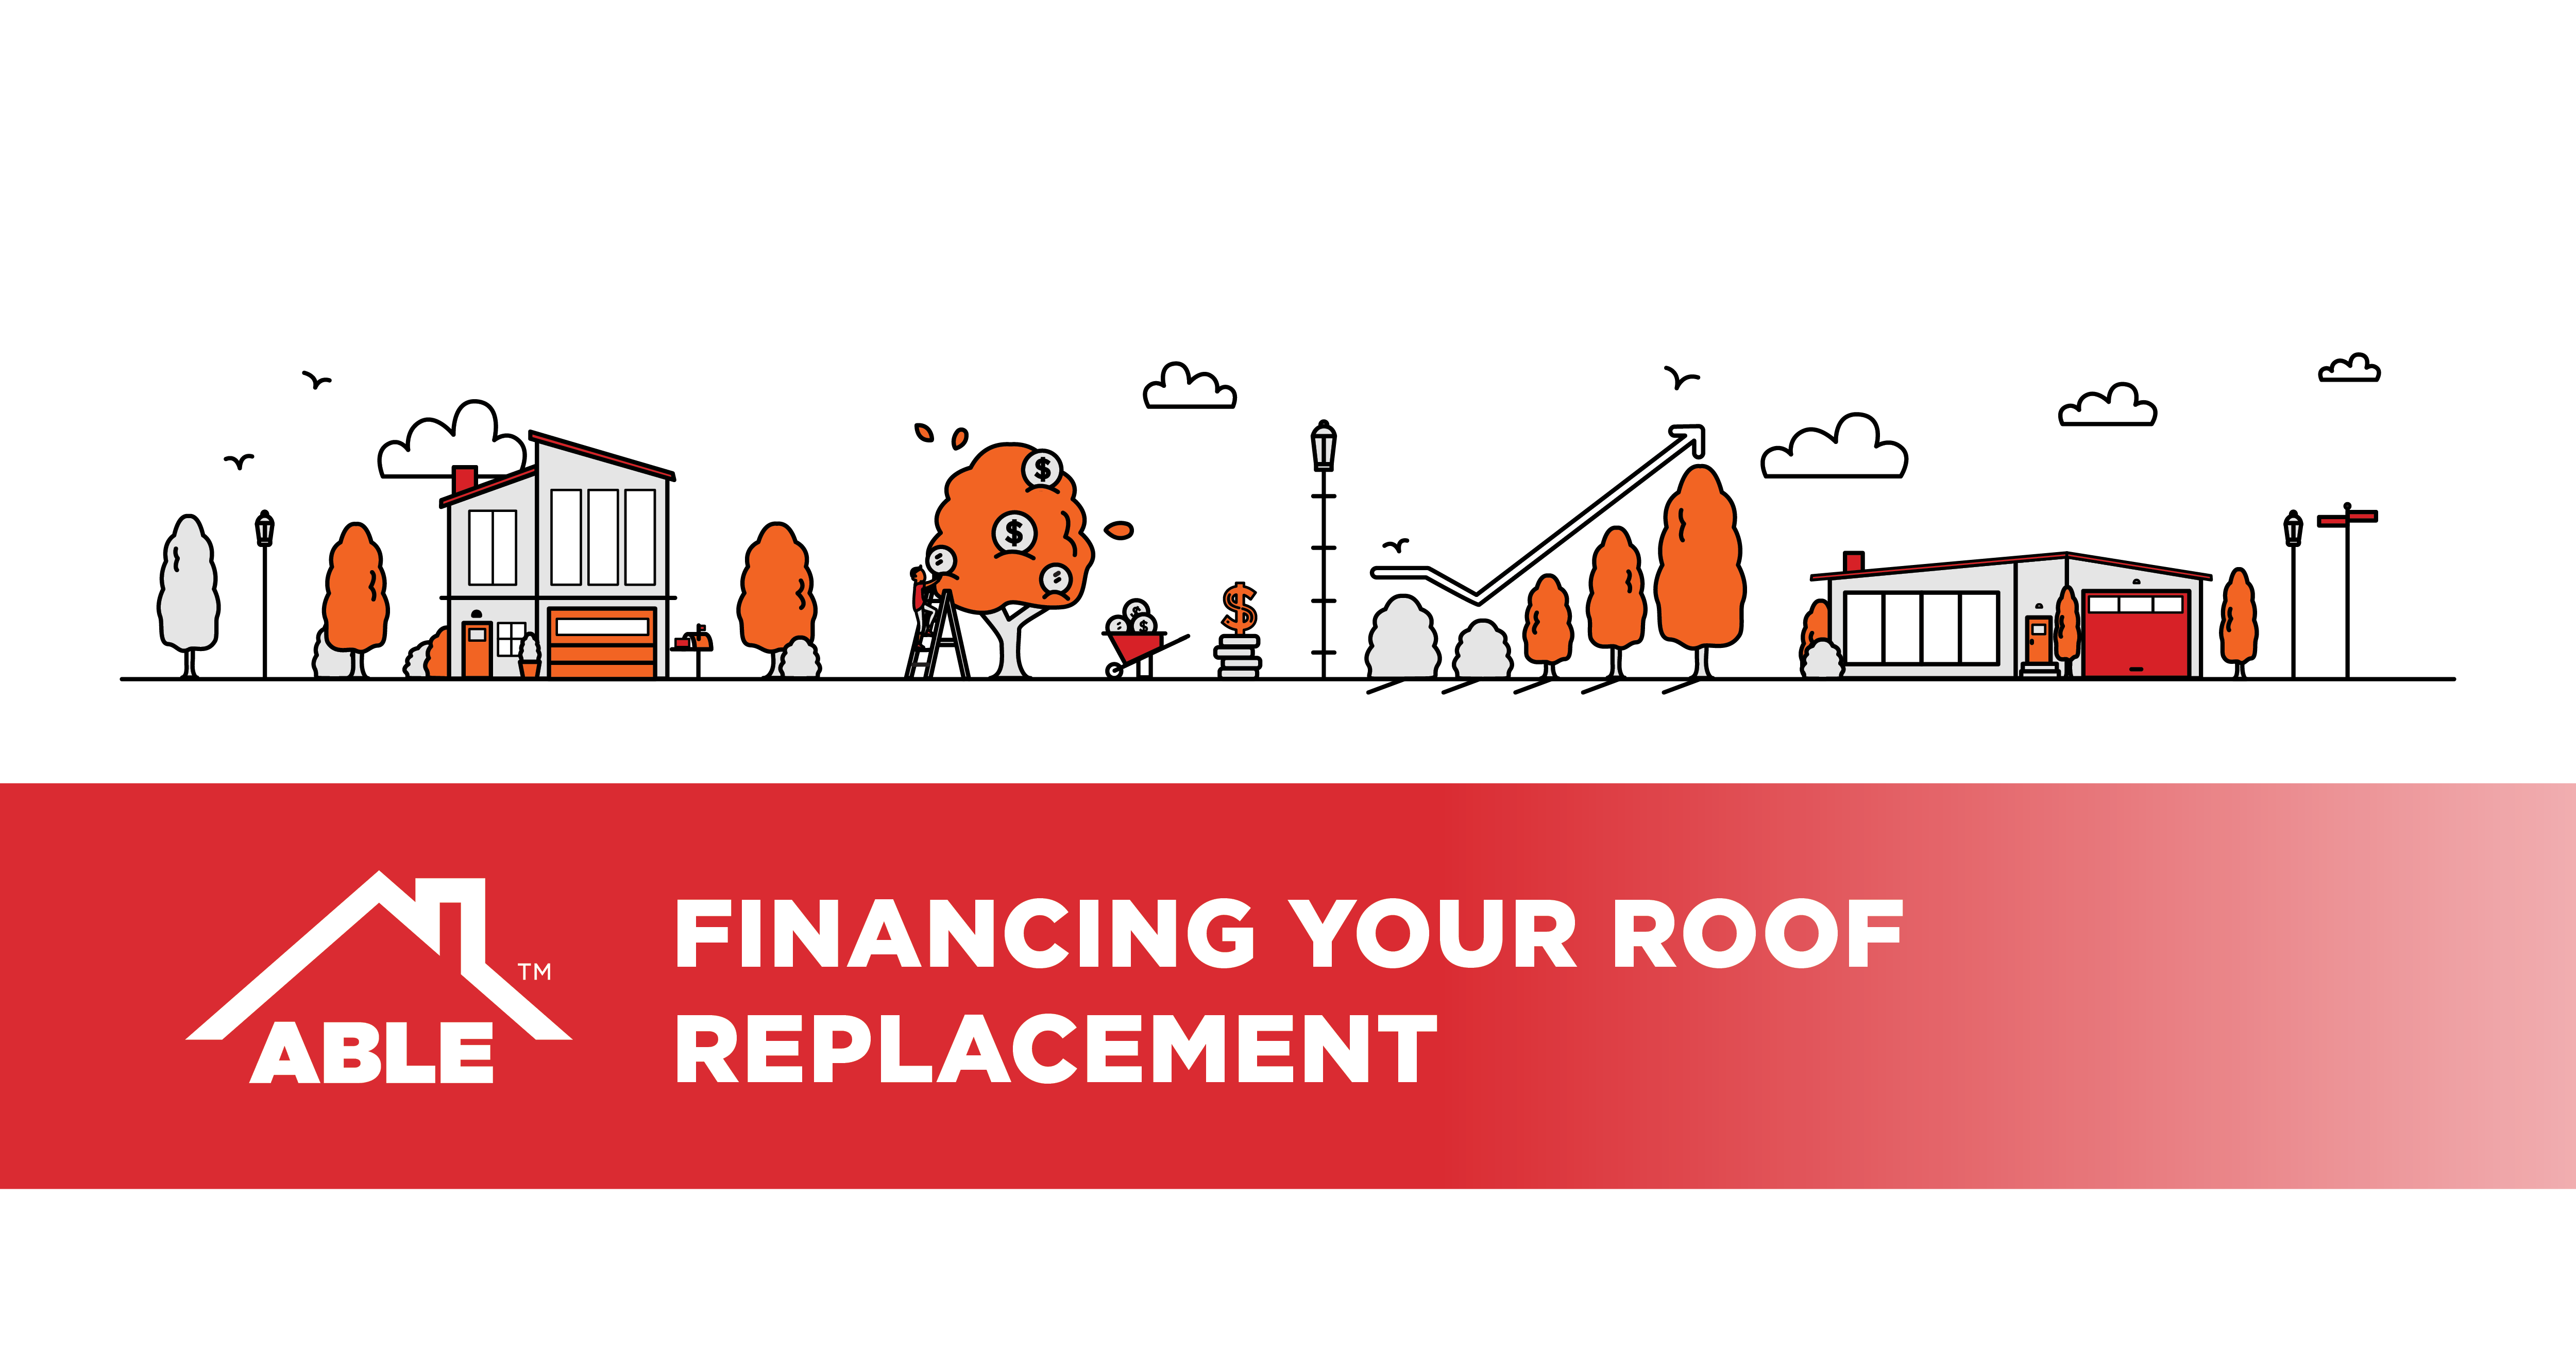 Financing your roof replacement